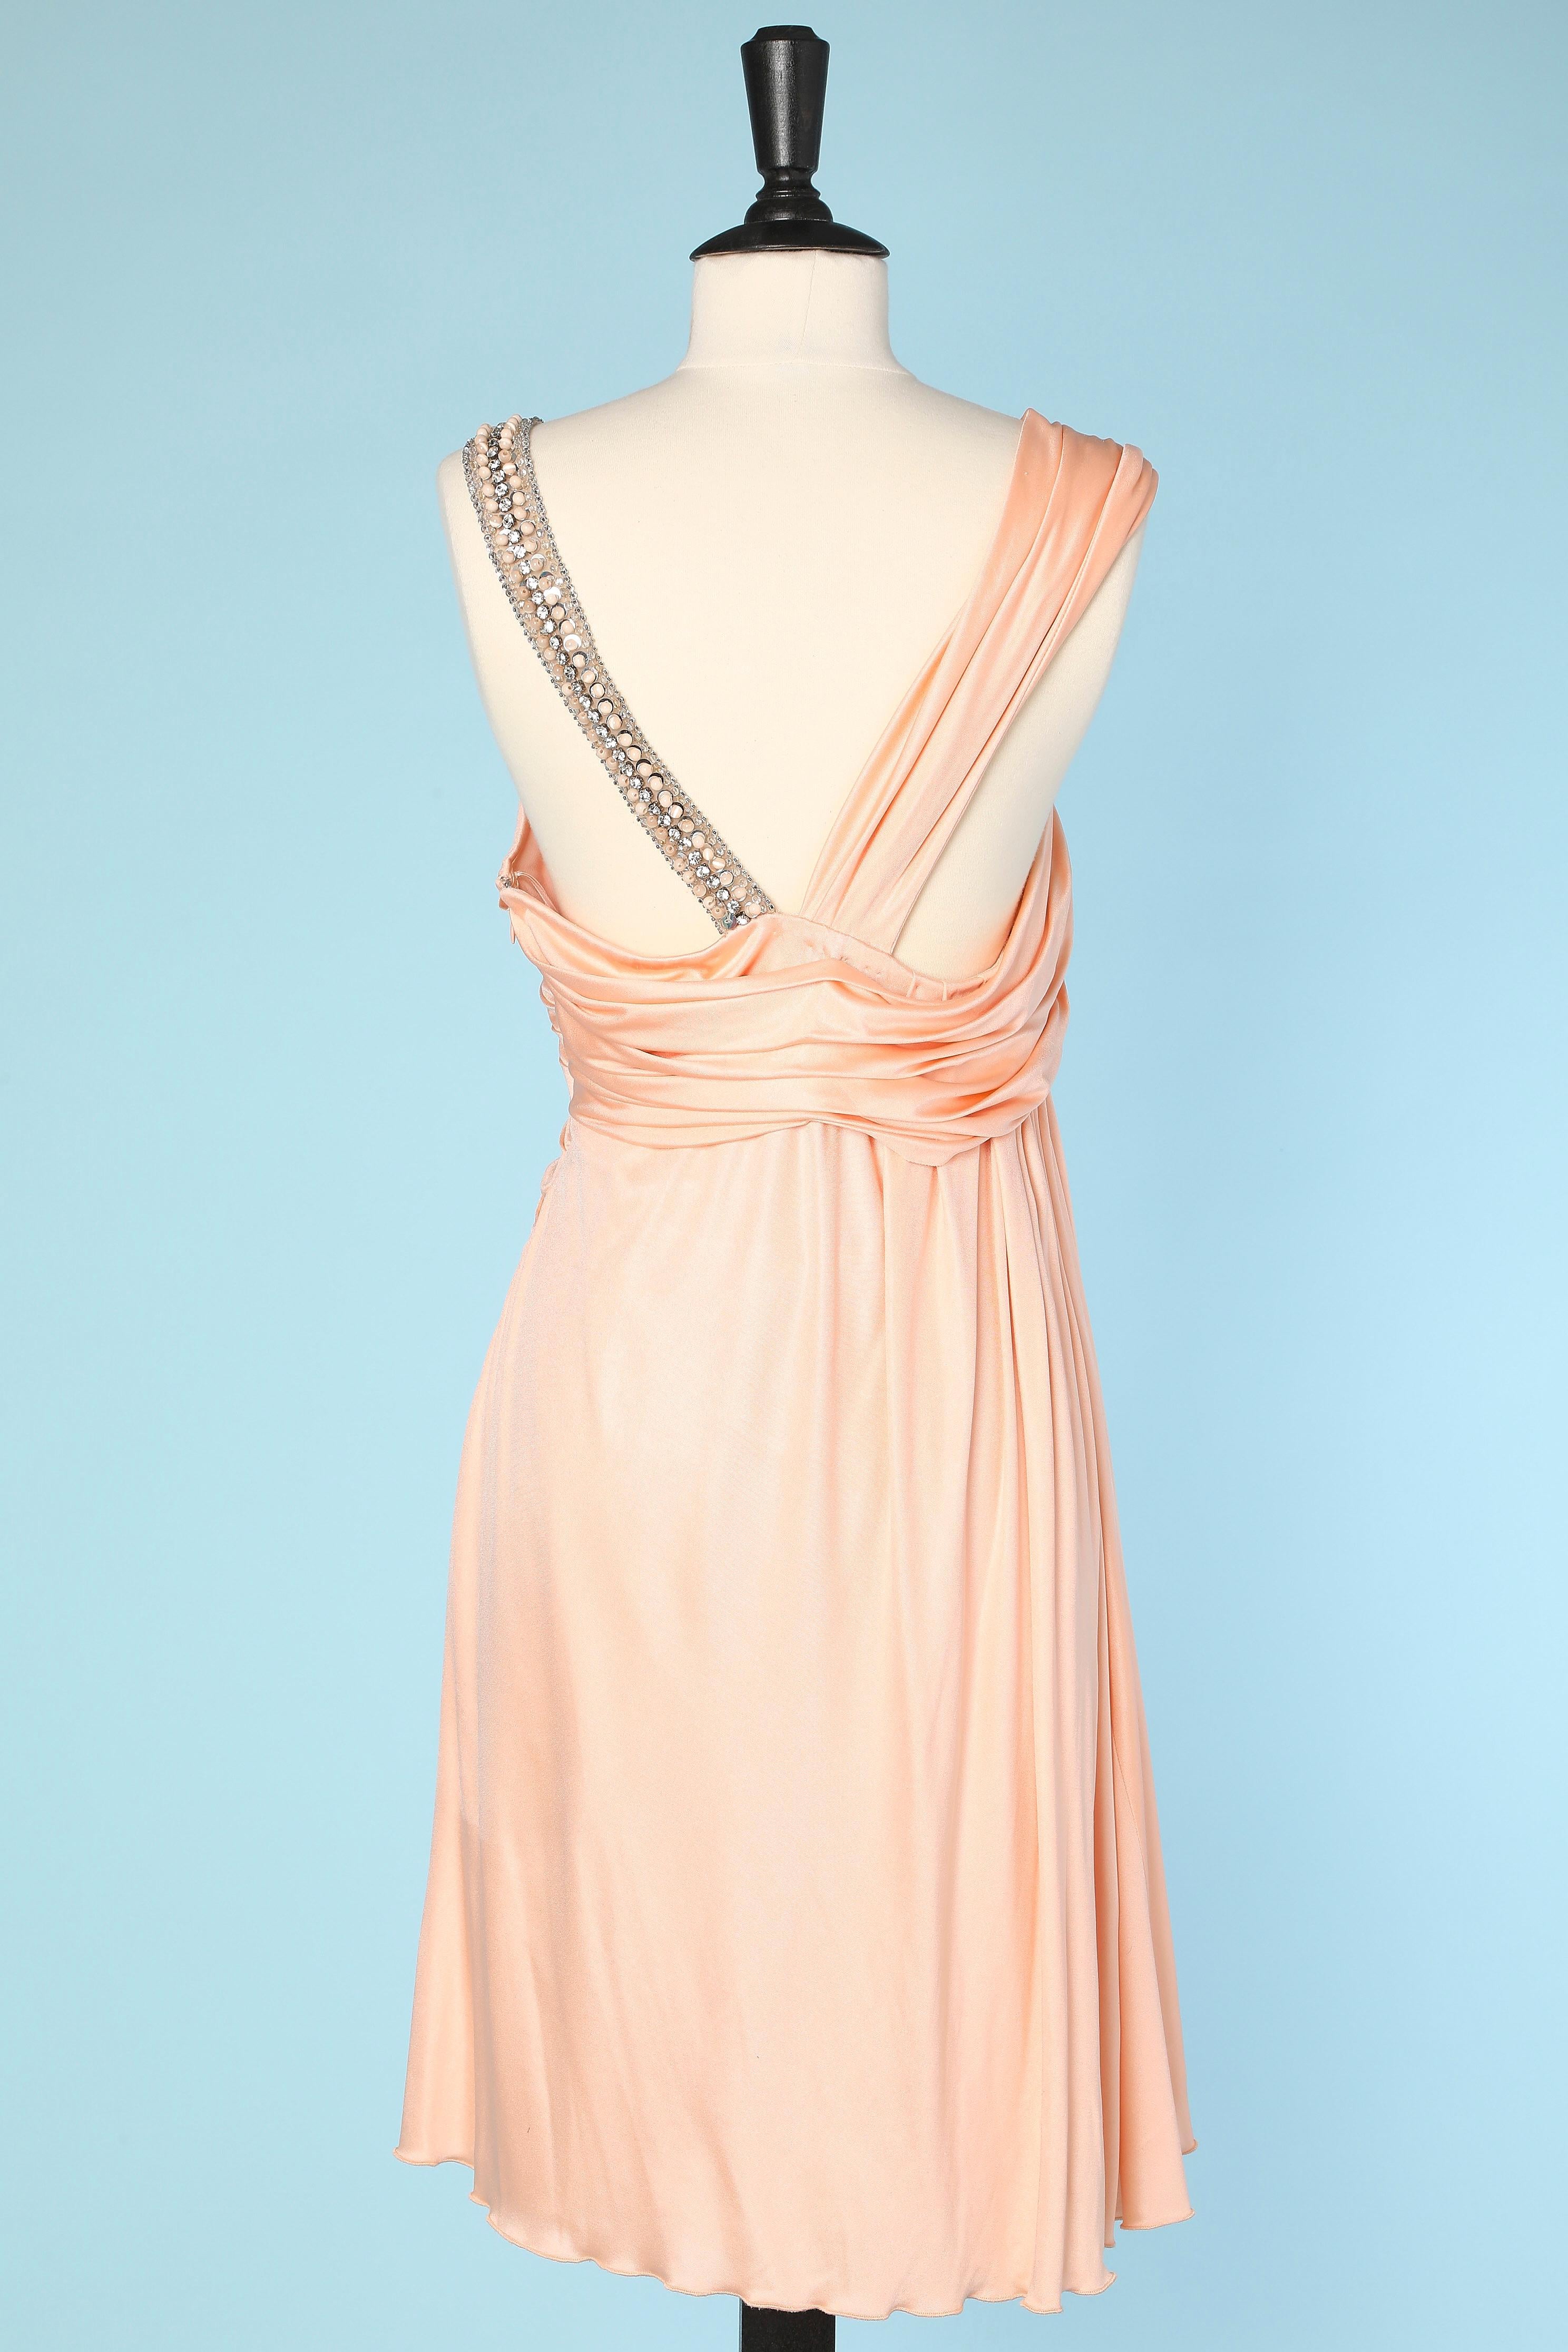 Pale pink silk jersey cocktail dress with rhinestone and beads strap Blumarine  For Sale 1